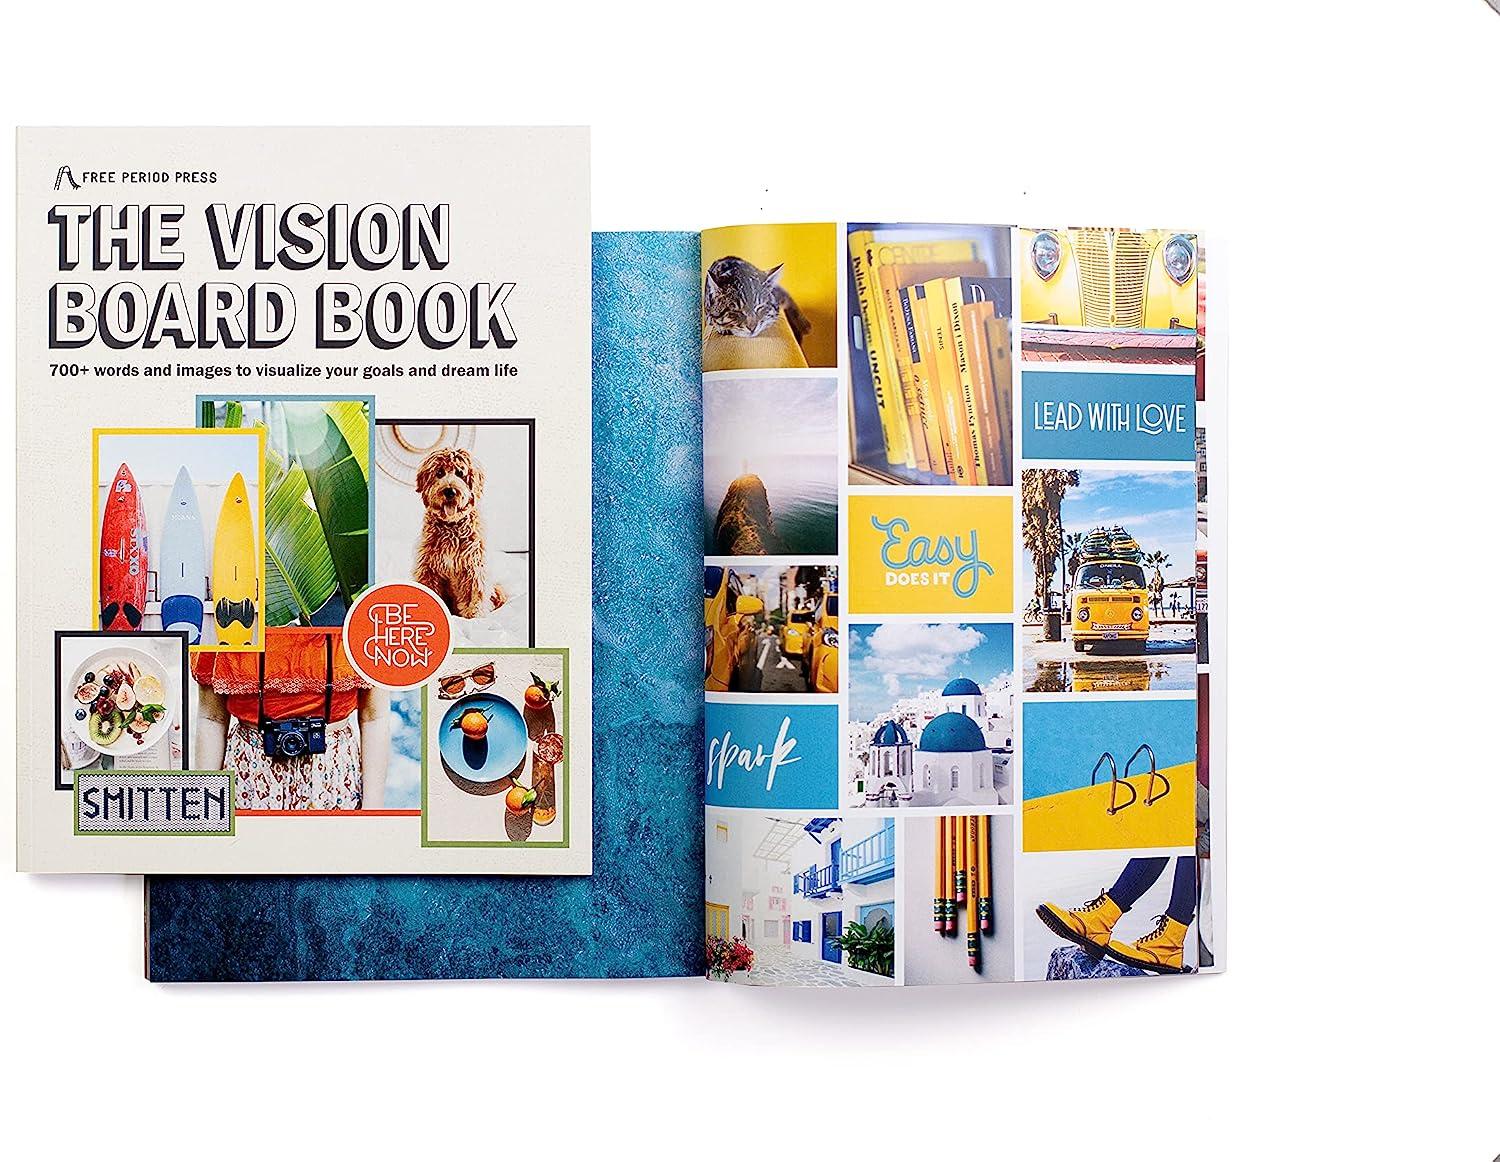 Free Period Press Vision Board Book, 700+ Words & Images in All Categories,  for Visualizing Your Life Goals & Dreams, Playful, Stylish and Diverse  Pictures for Collage Making & Scrapbooking Adults